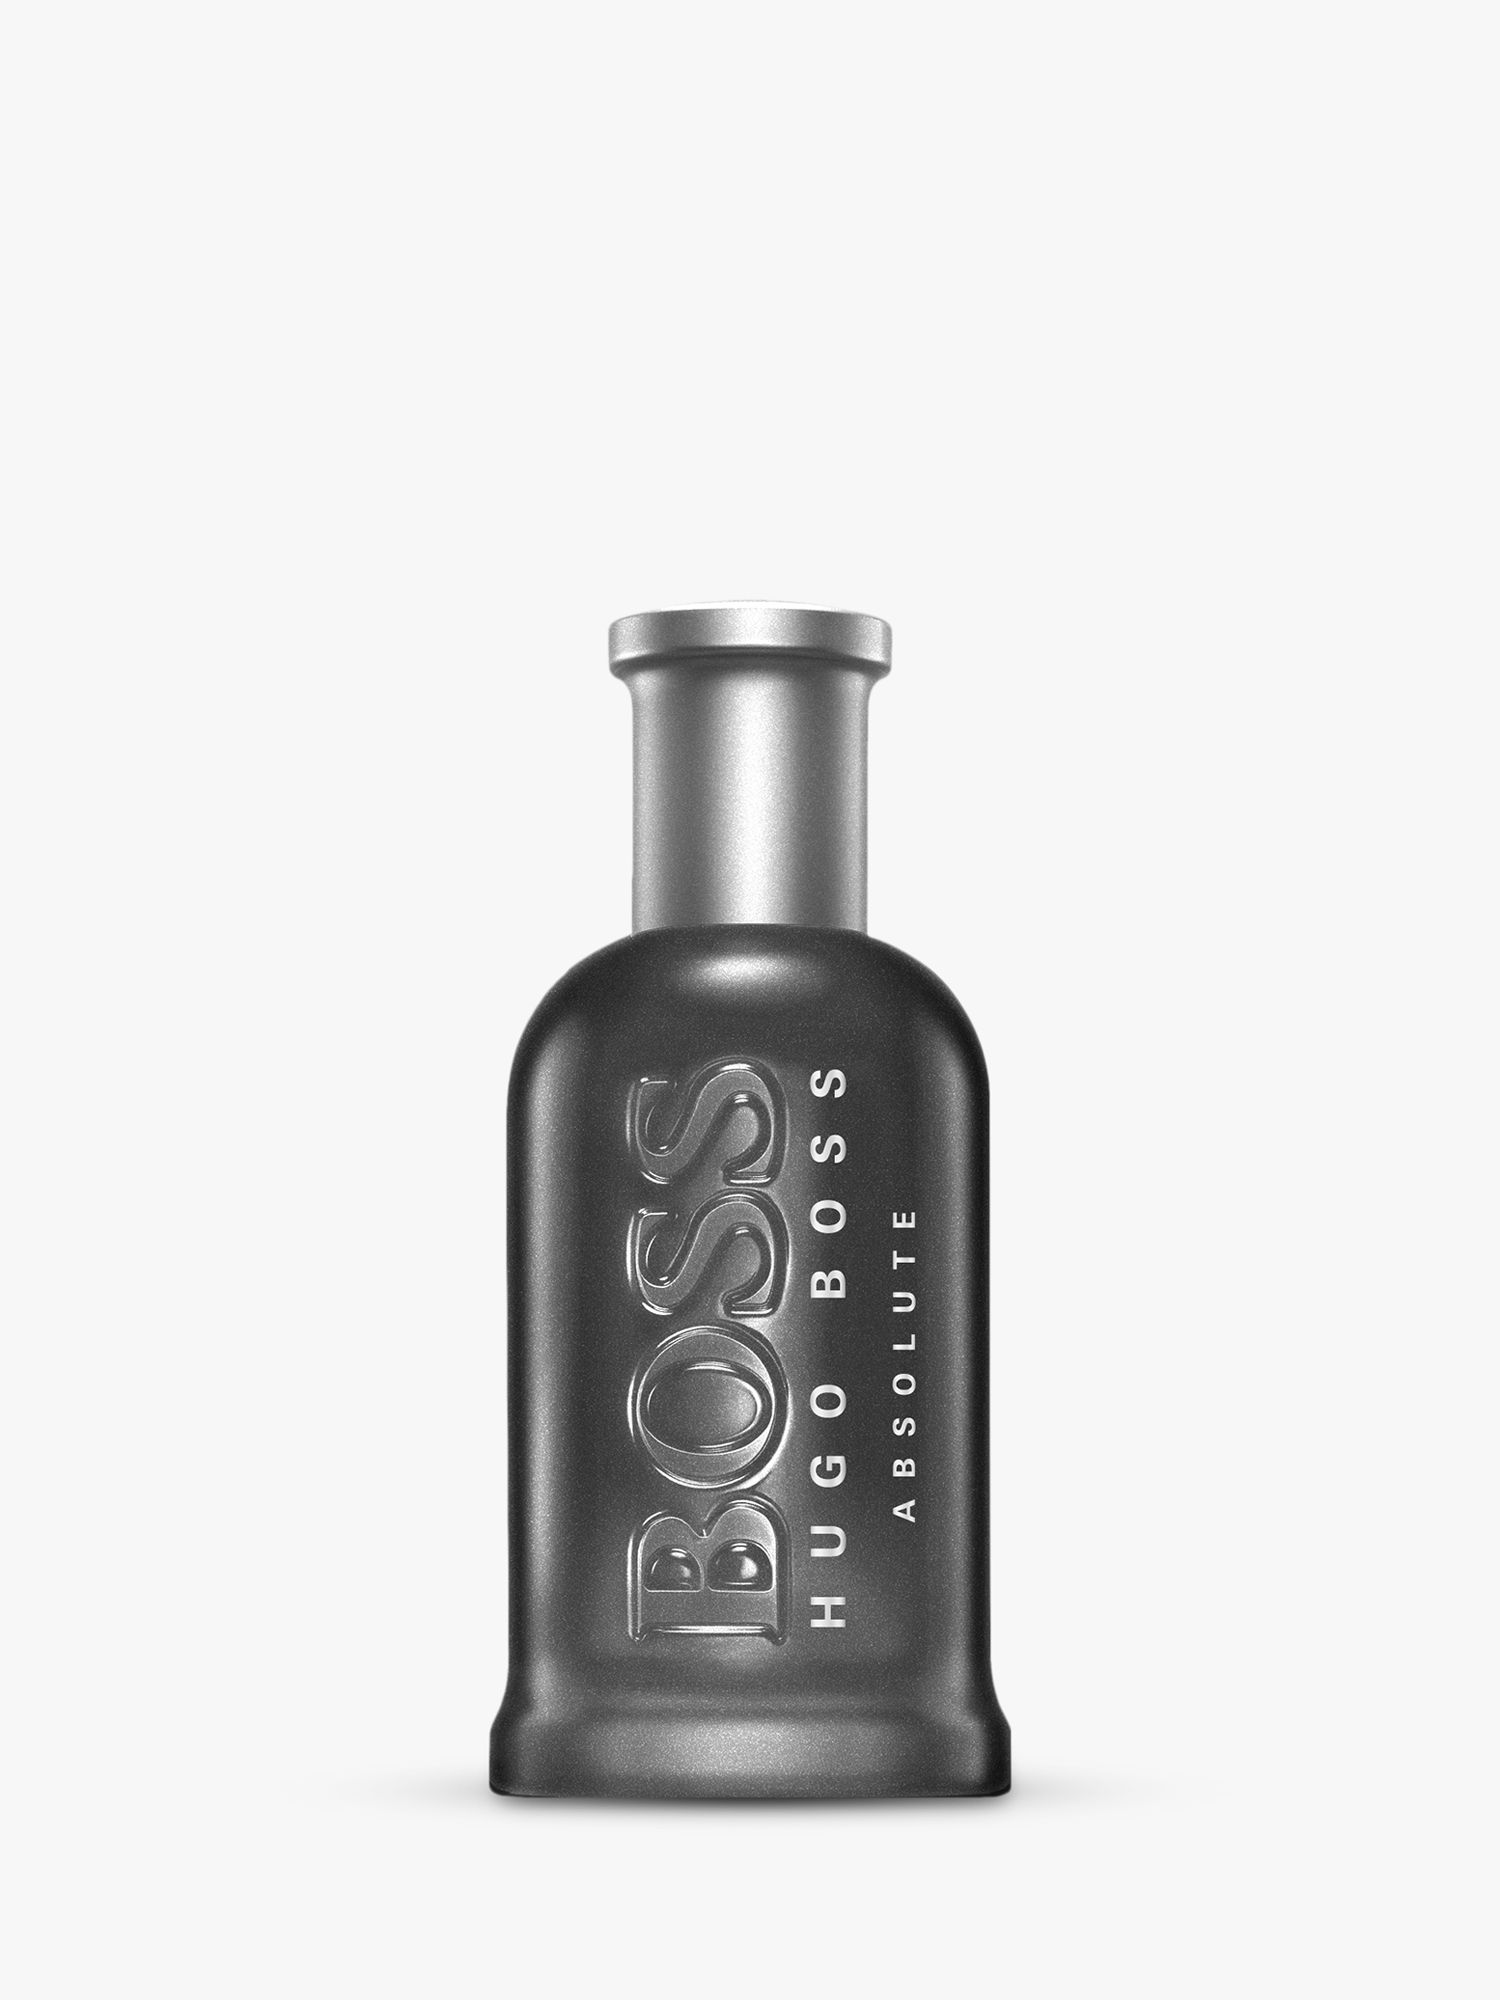 boss the scent black edition